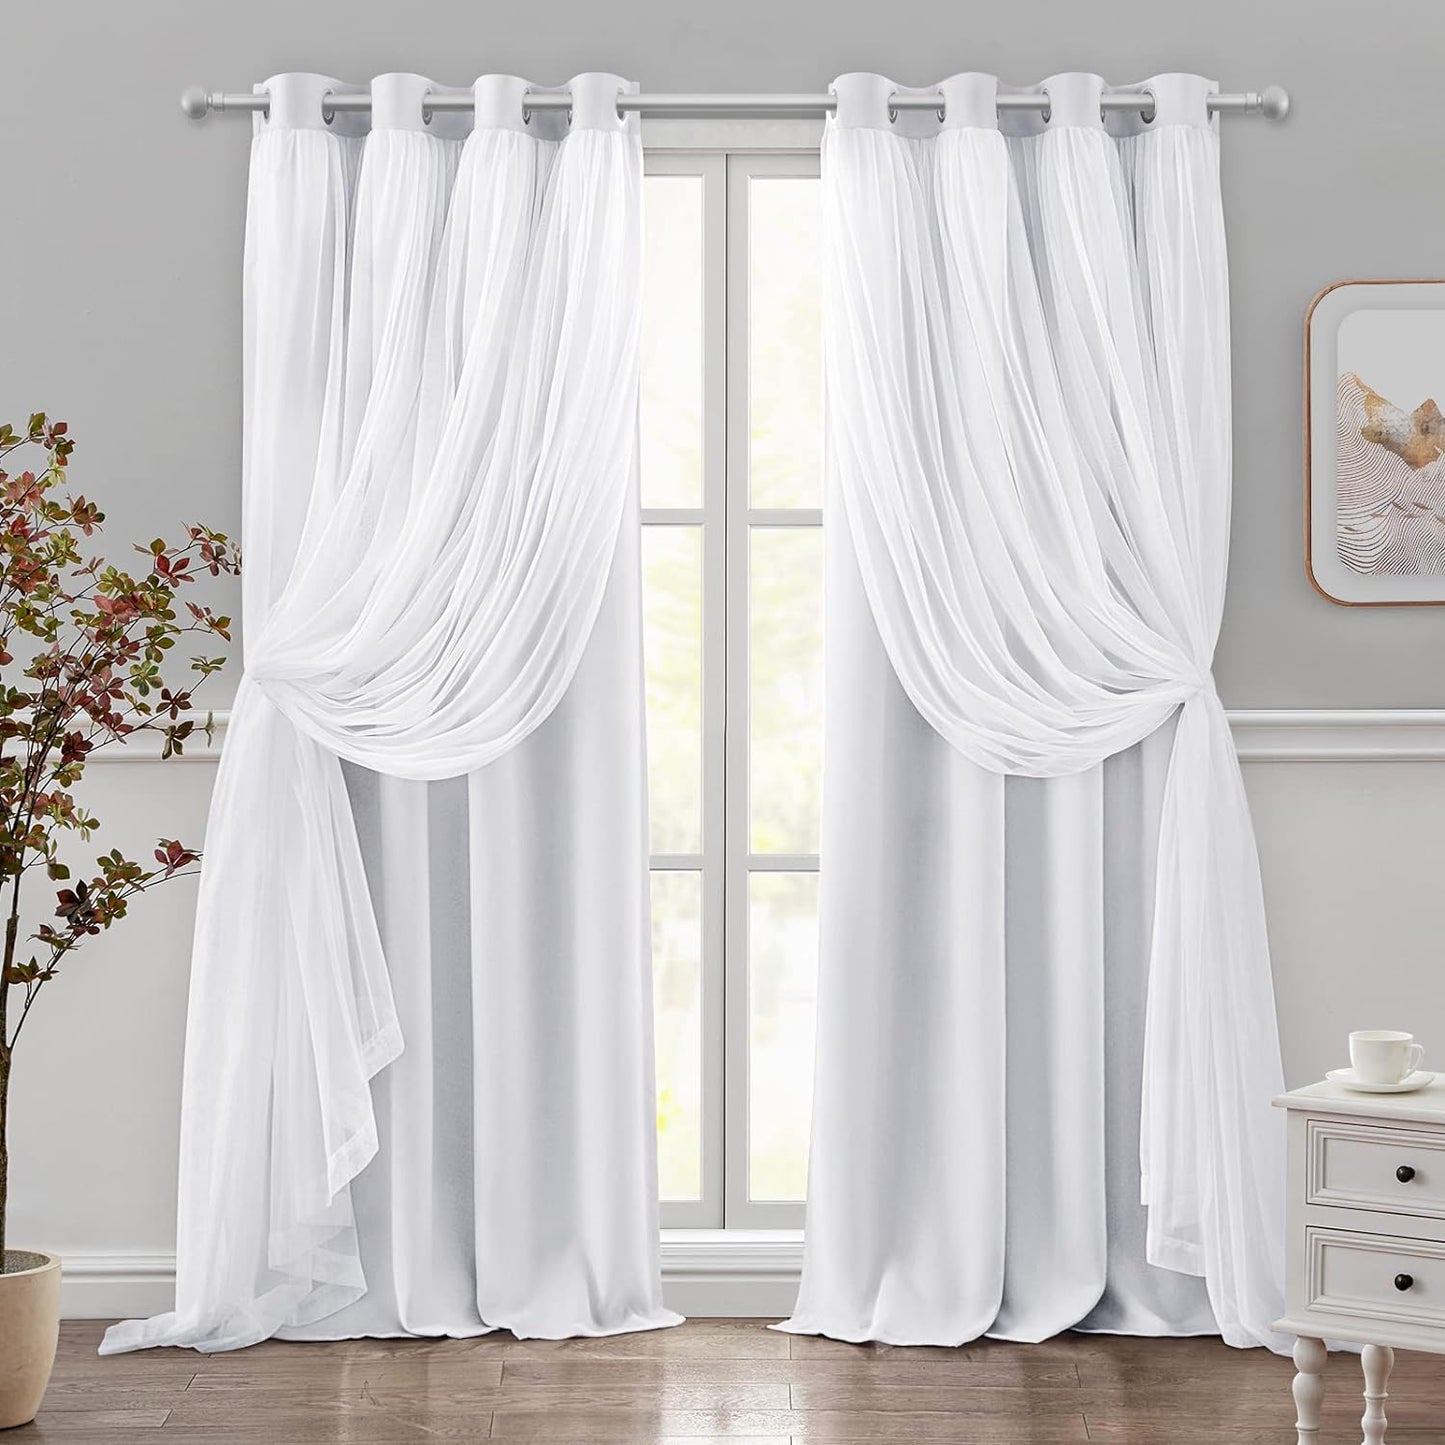 HOMEIDEAS Double Layer Curtains Light Grey Blackout Curtains 84 Inch Length 2 Panels Nursery Curtains for Girls Kids Bedroom Grommet Blackout Curtains with Sheer Overlay  HOMEIDEAS Greyish White 52" X 96" 